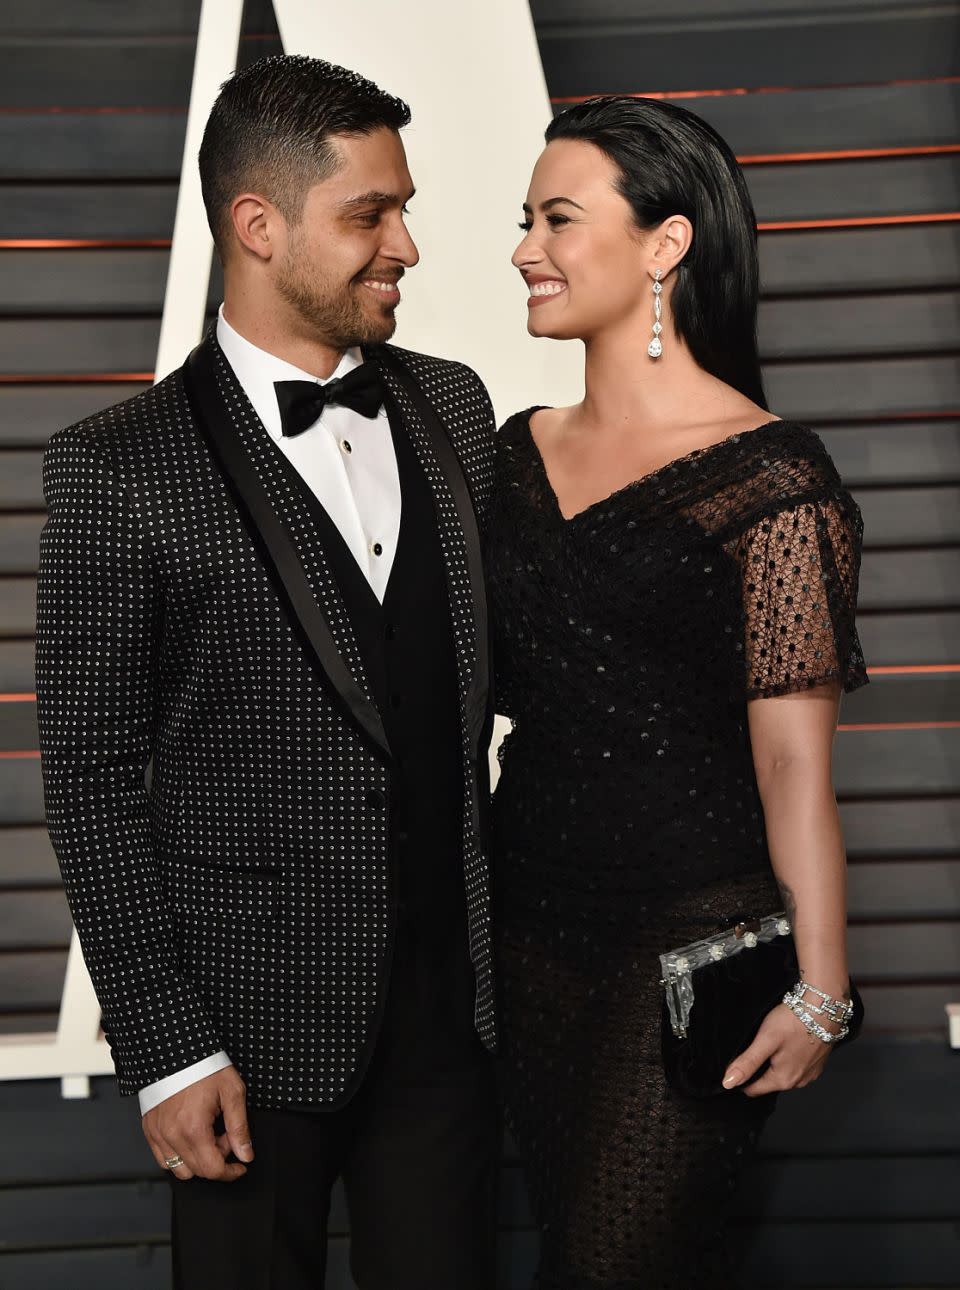 She also talks about her break-up from Wilmer Valderrama. Source: Getty